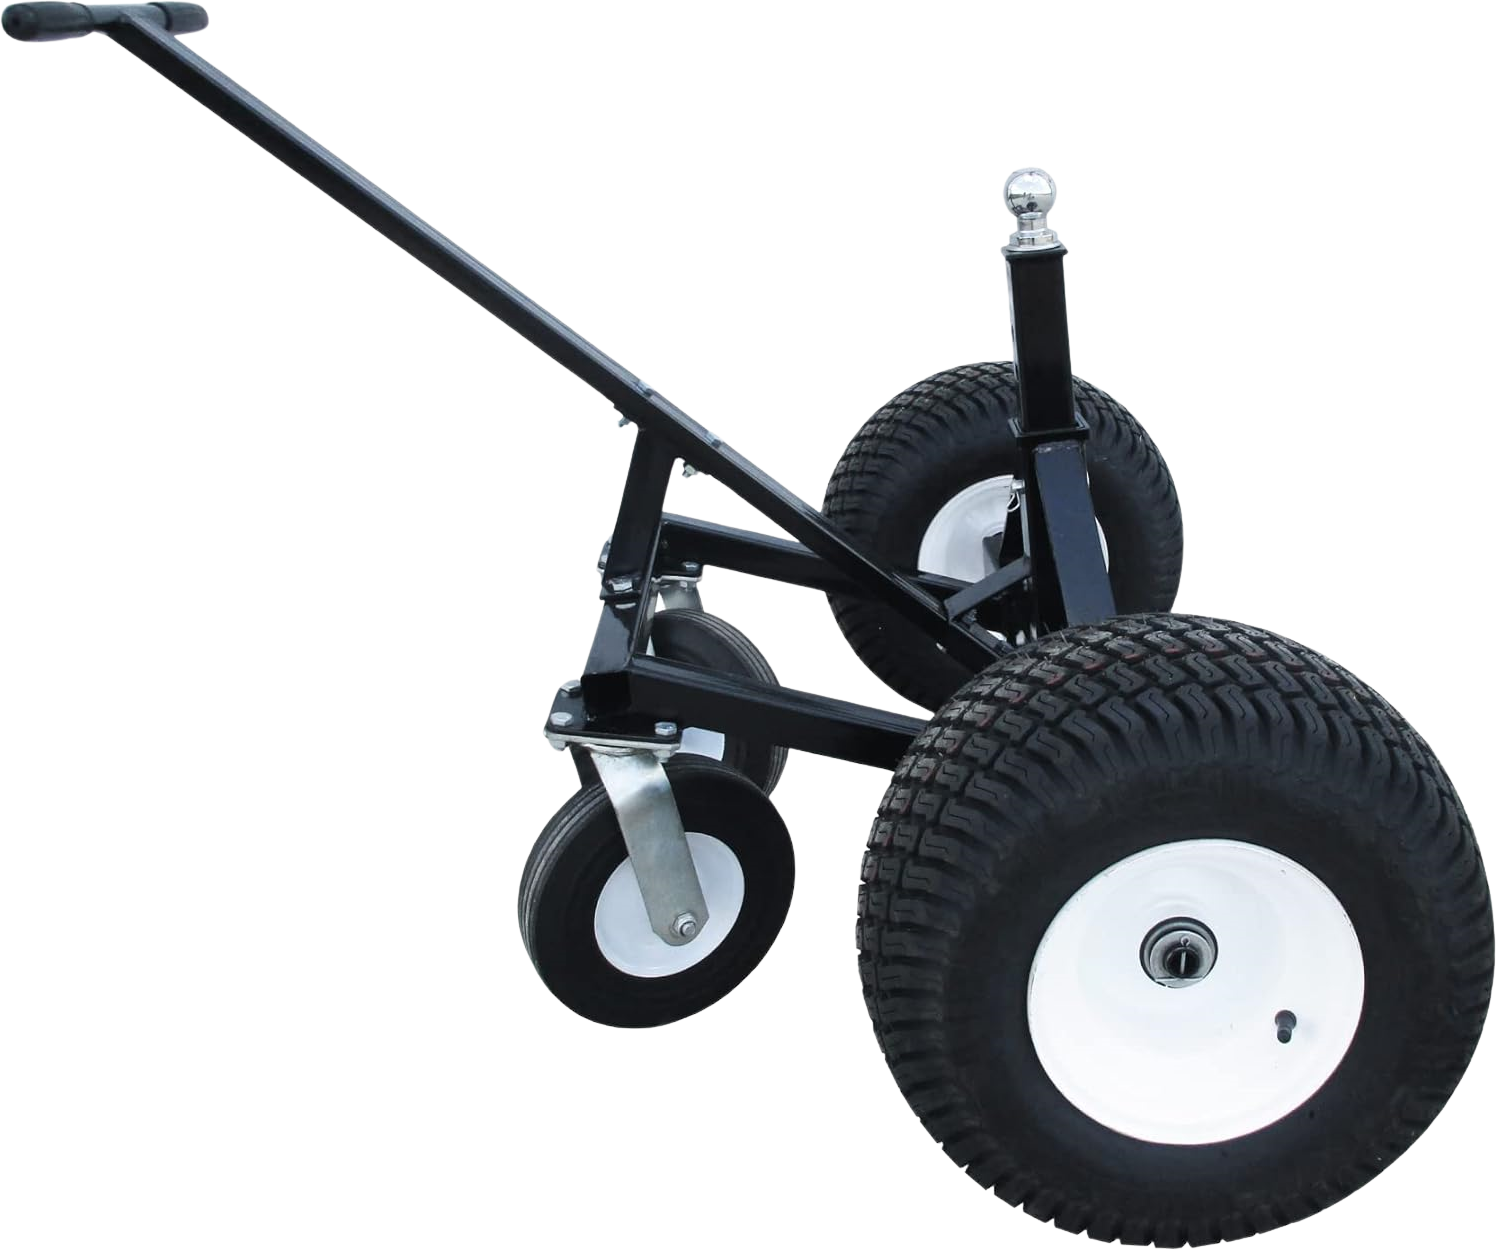 Tow Tuff, Tow Tuff TMD-15002C Trailer Dolly Adjustable 23.25" to 37" Max Weight 1500lbs Works with 2" Coupler or Larger New